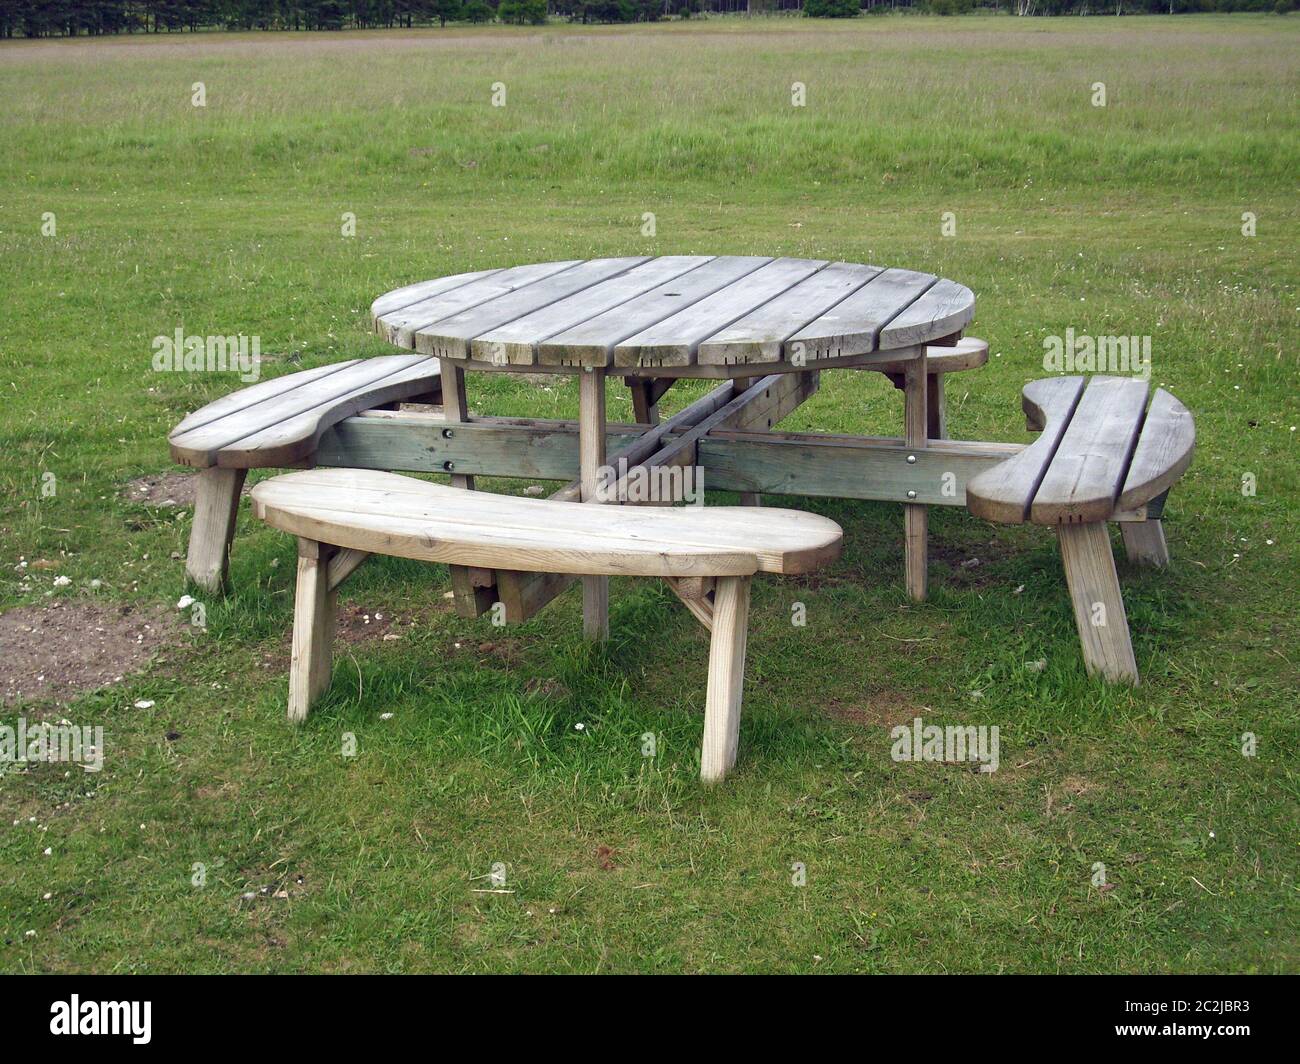 Round wooden picnic table with rounded seats on a grass field with trees  just visible in the background Stock Photo - Alamy